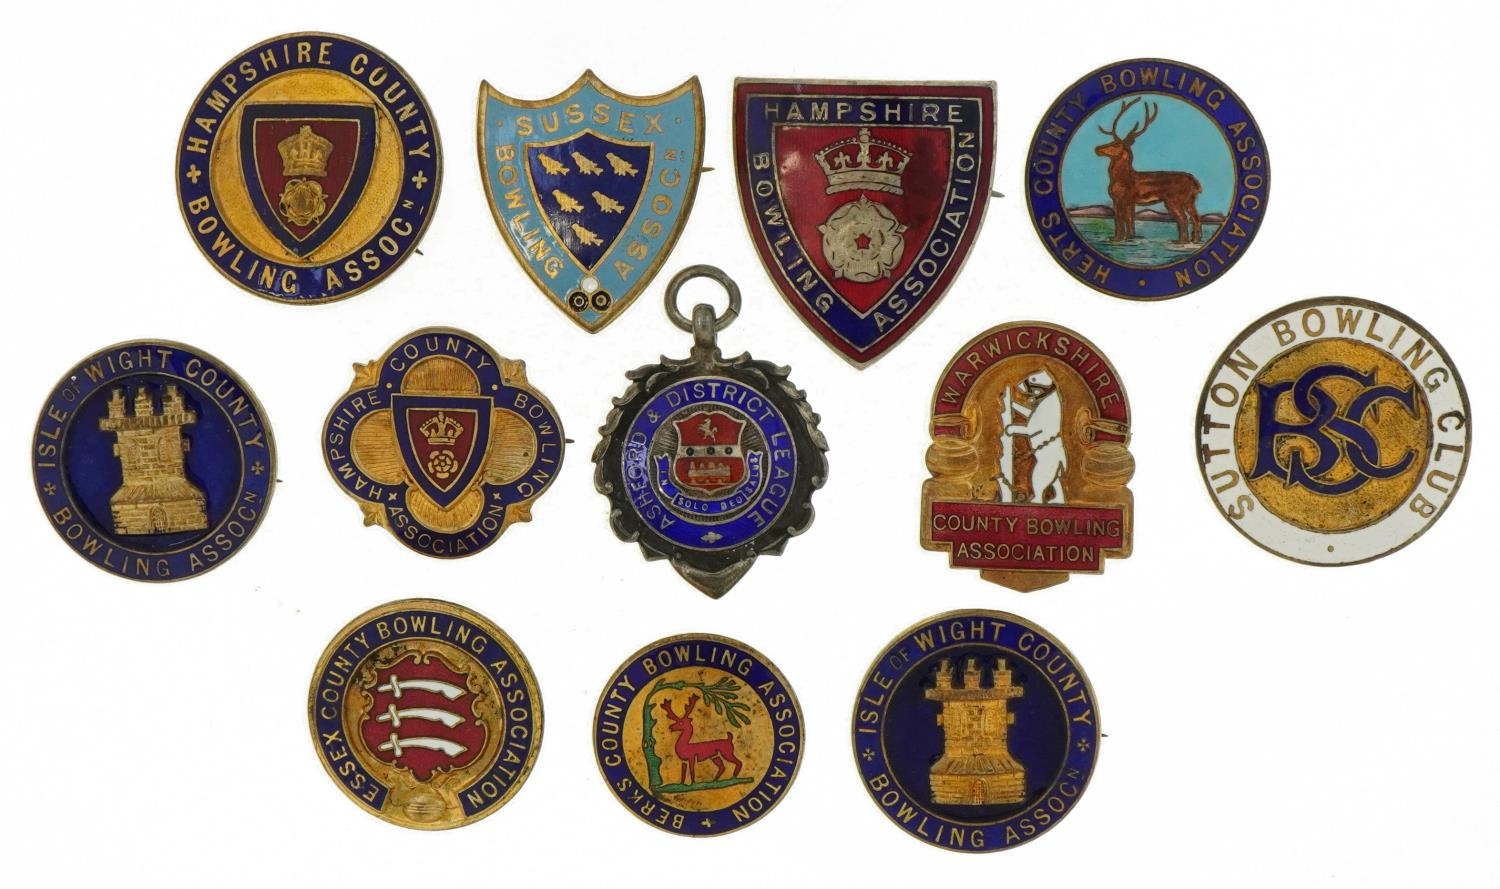 Bowling enamel pin badges and a silver and enamel jewel including Sussex Bowling Association and